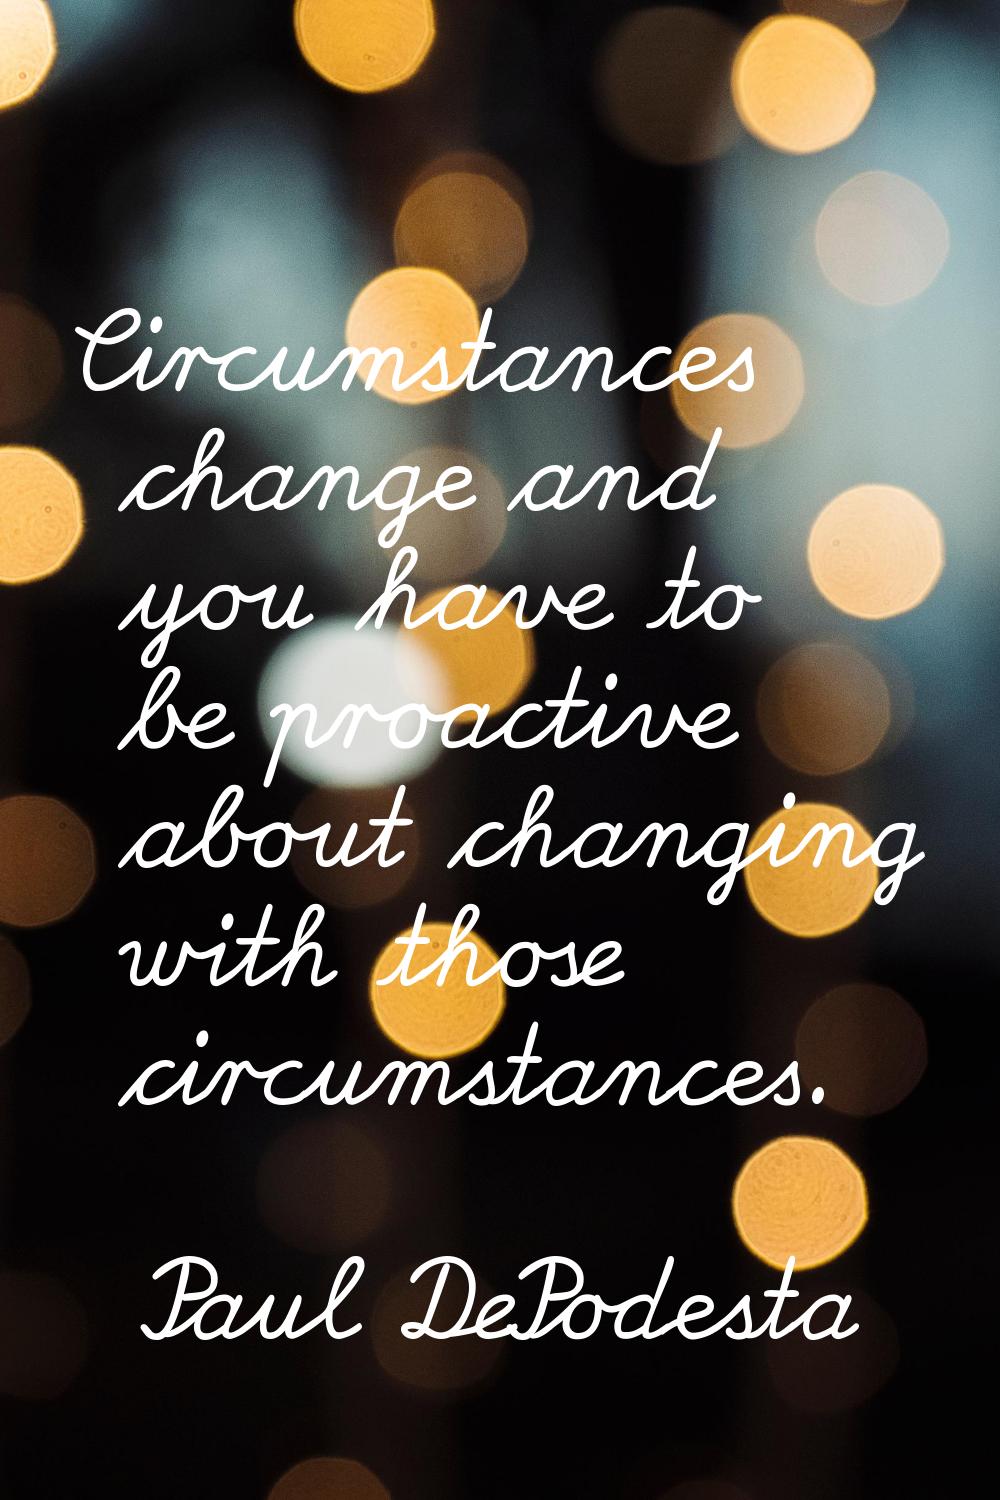 Circumstances change and you have to be proactive about changing with those circumstances.